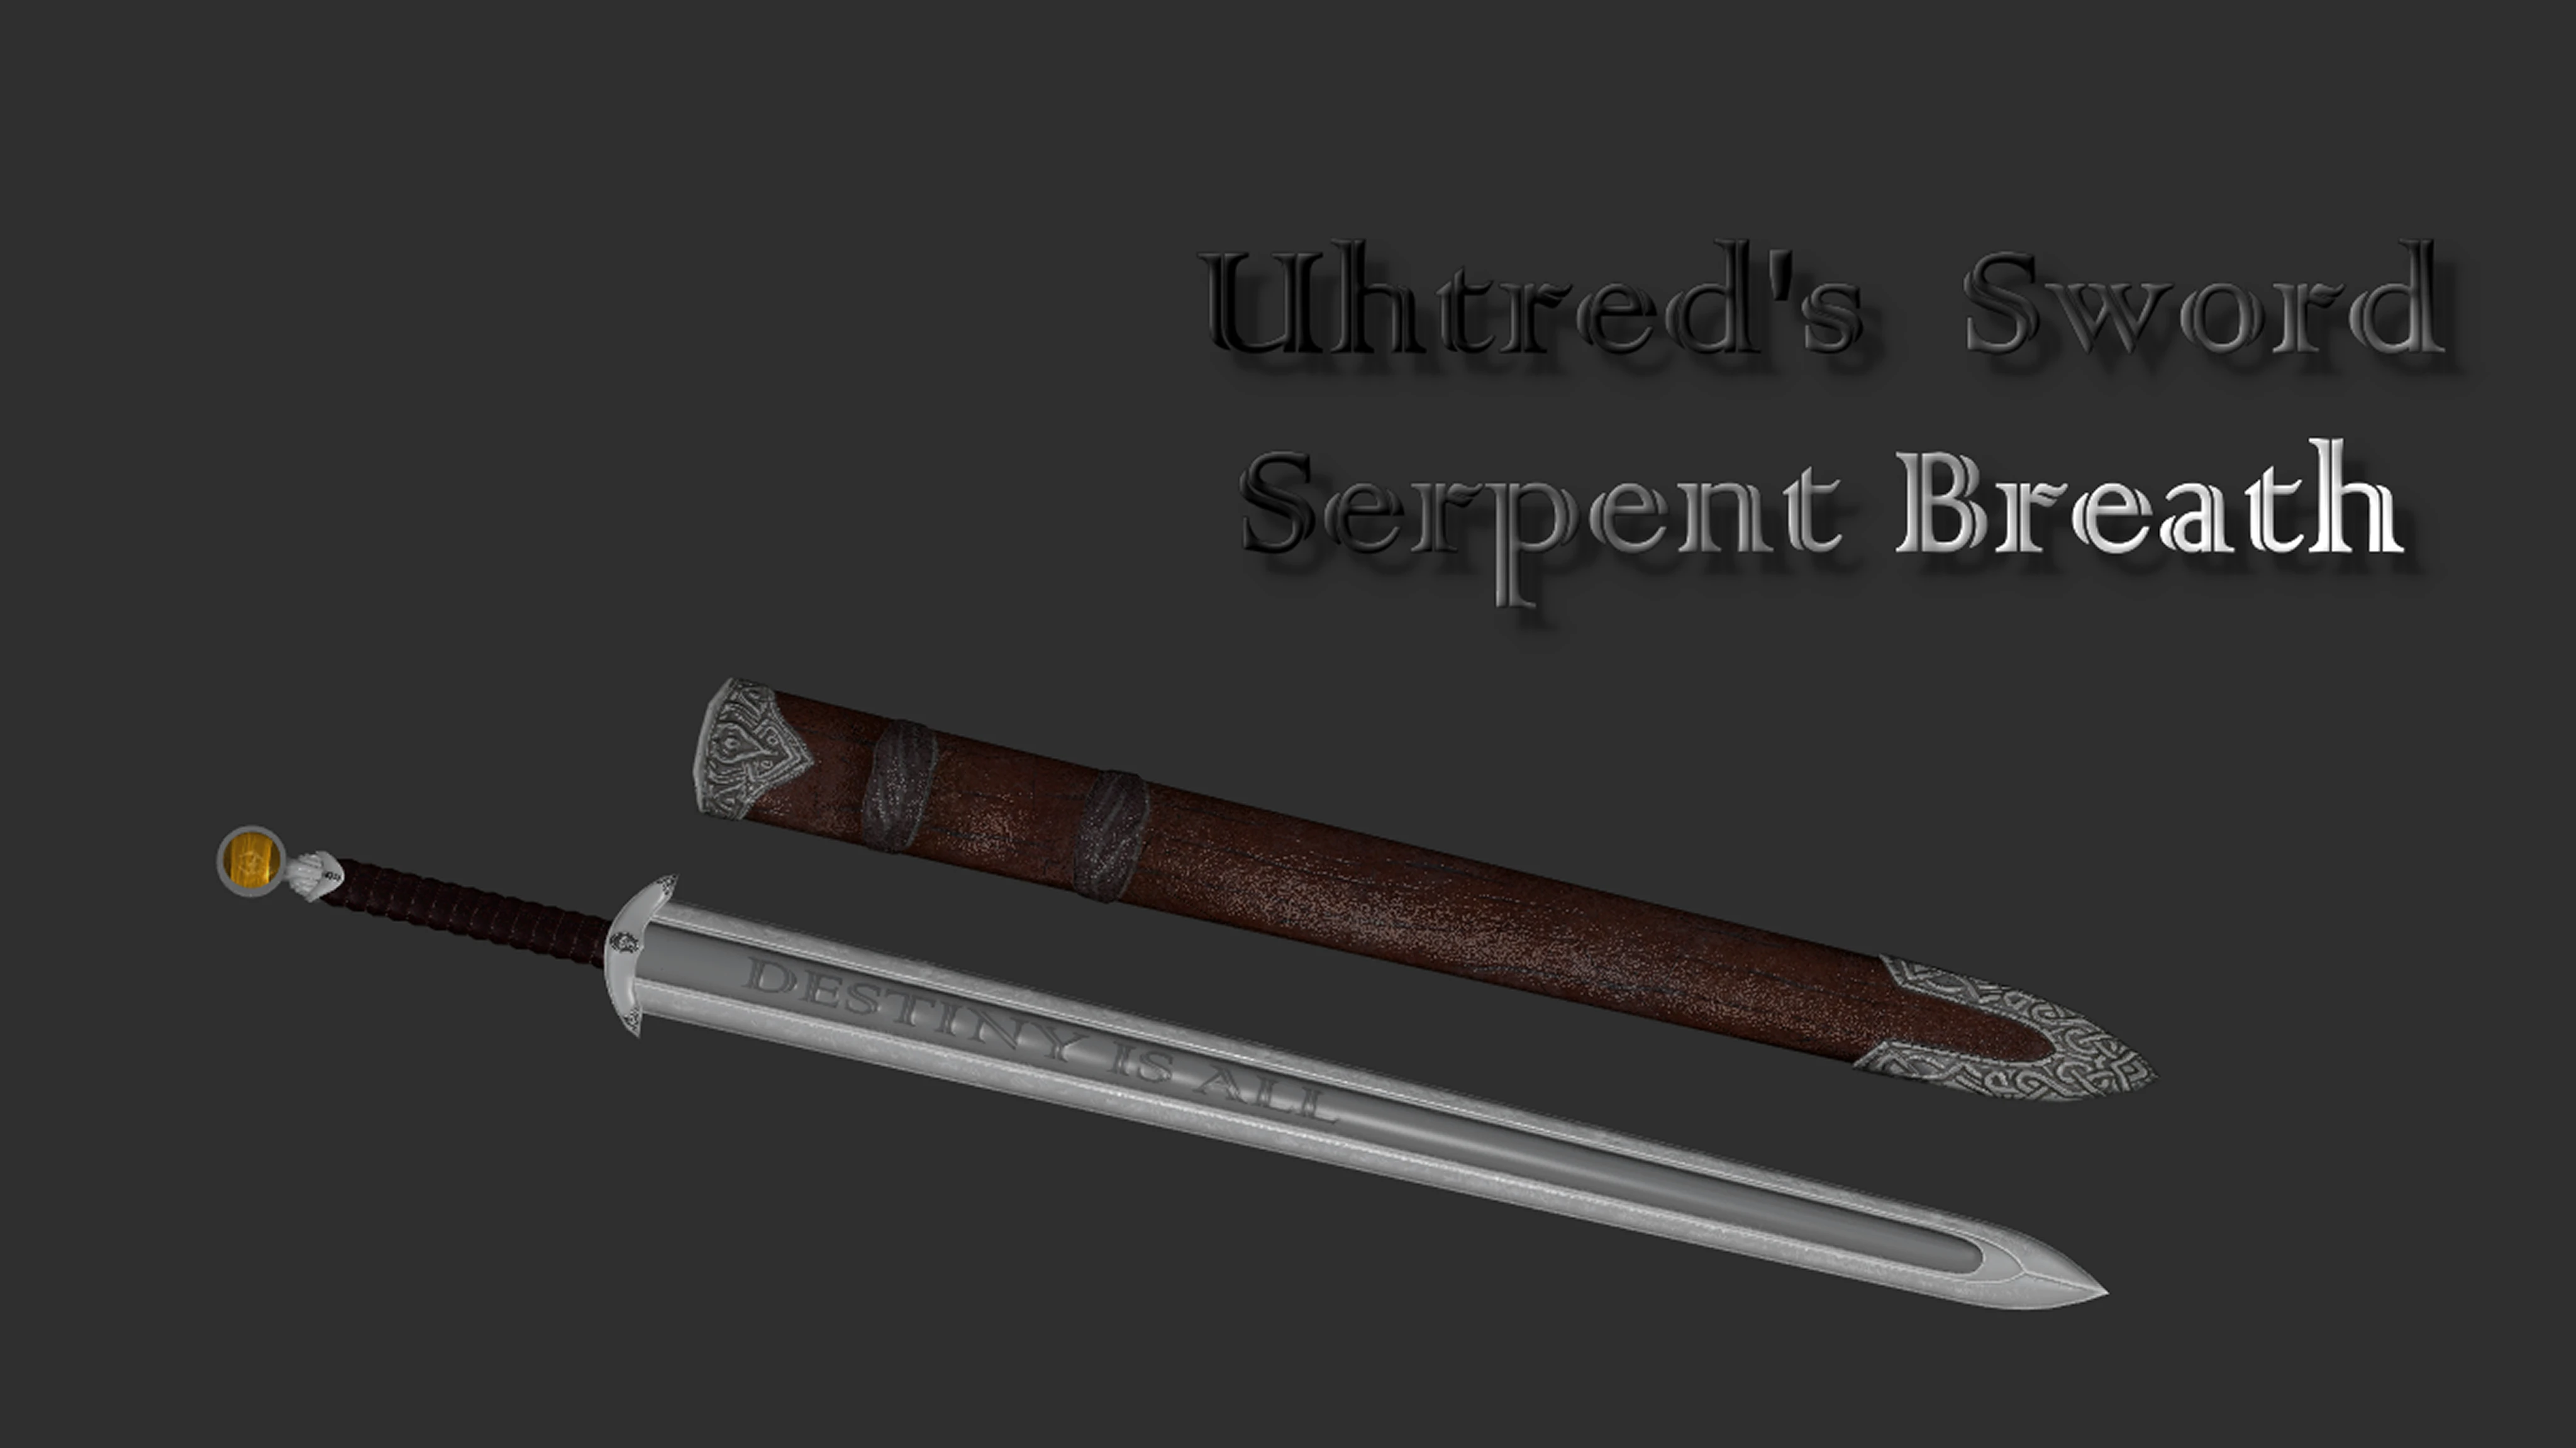 Serpent-Breath the Sword of Uhtred